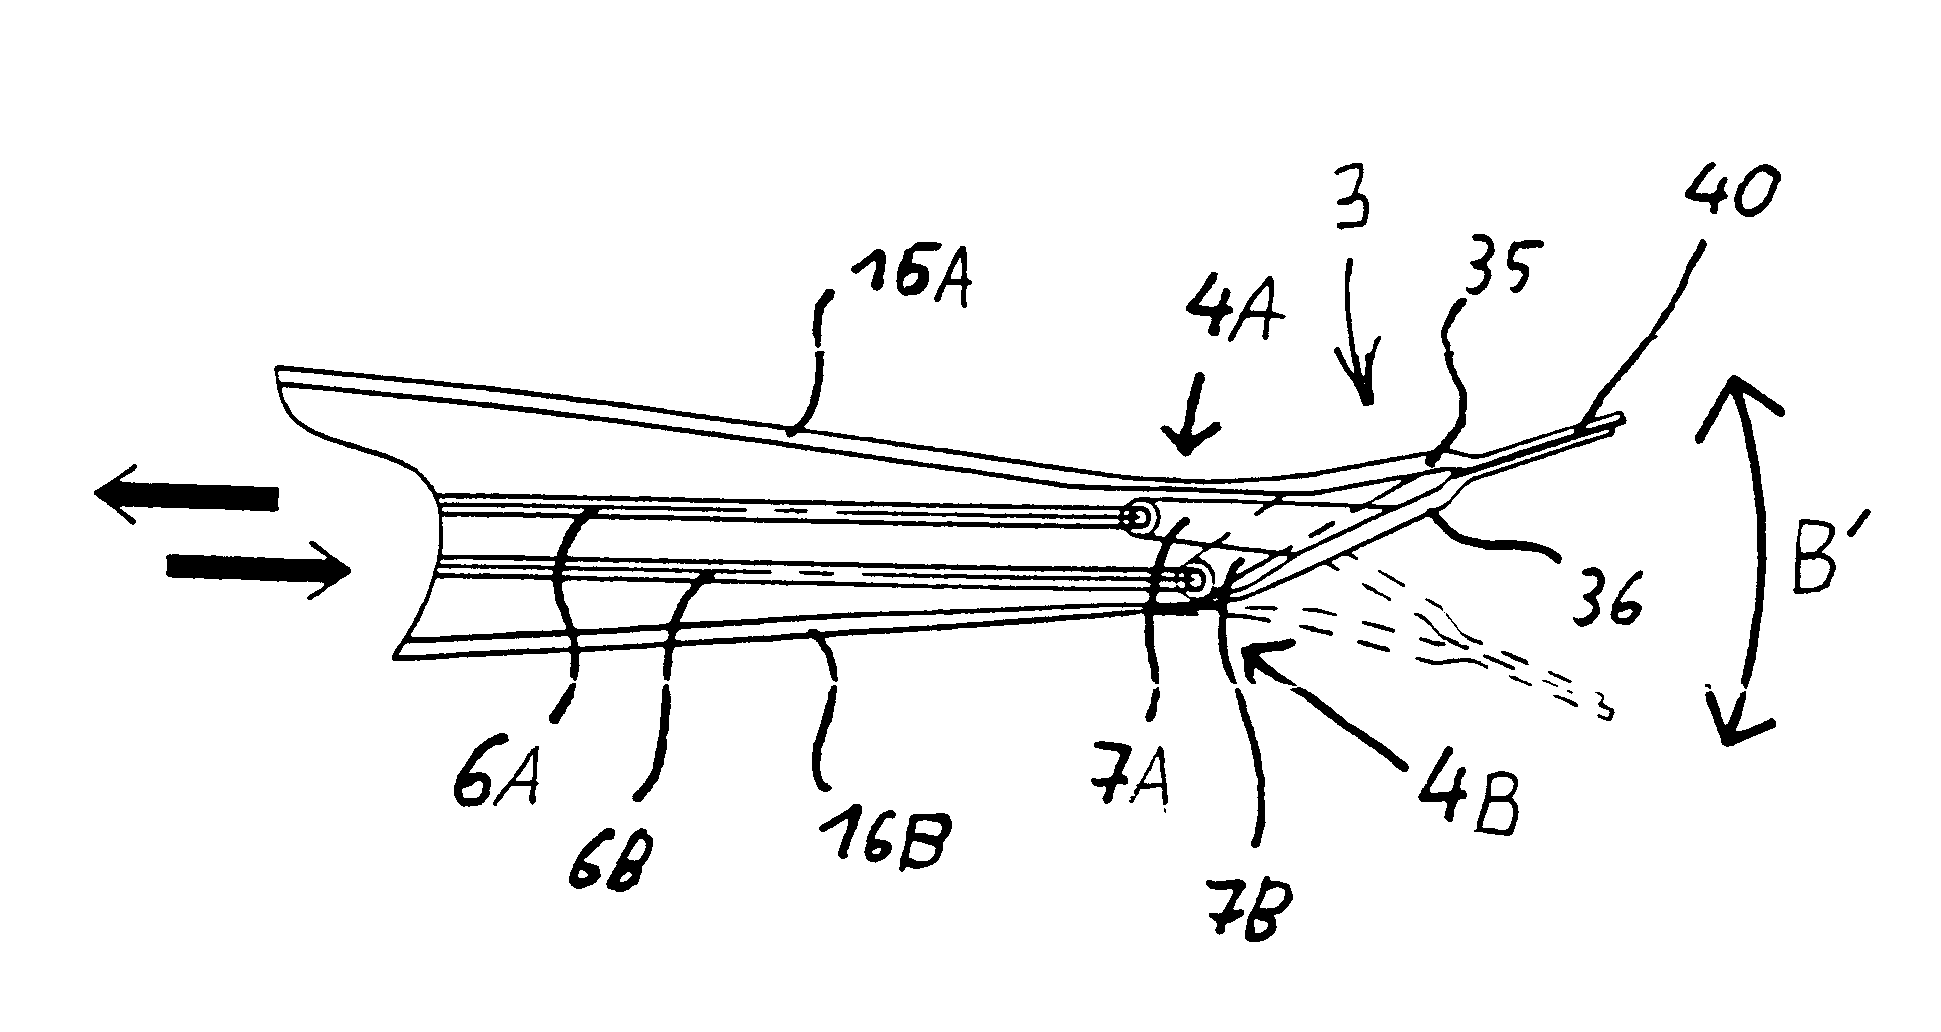 Helicopter rotor blade with a movable flap